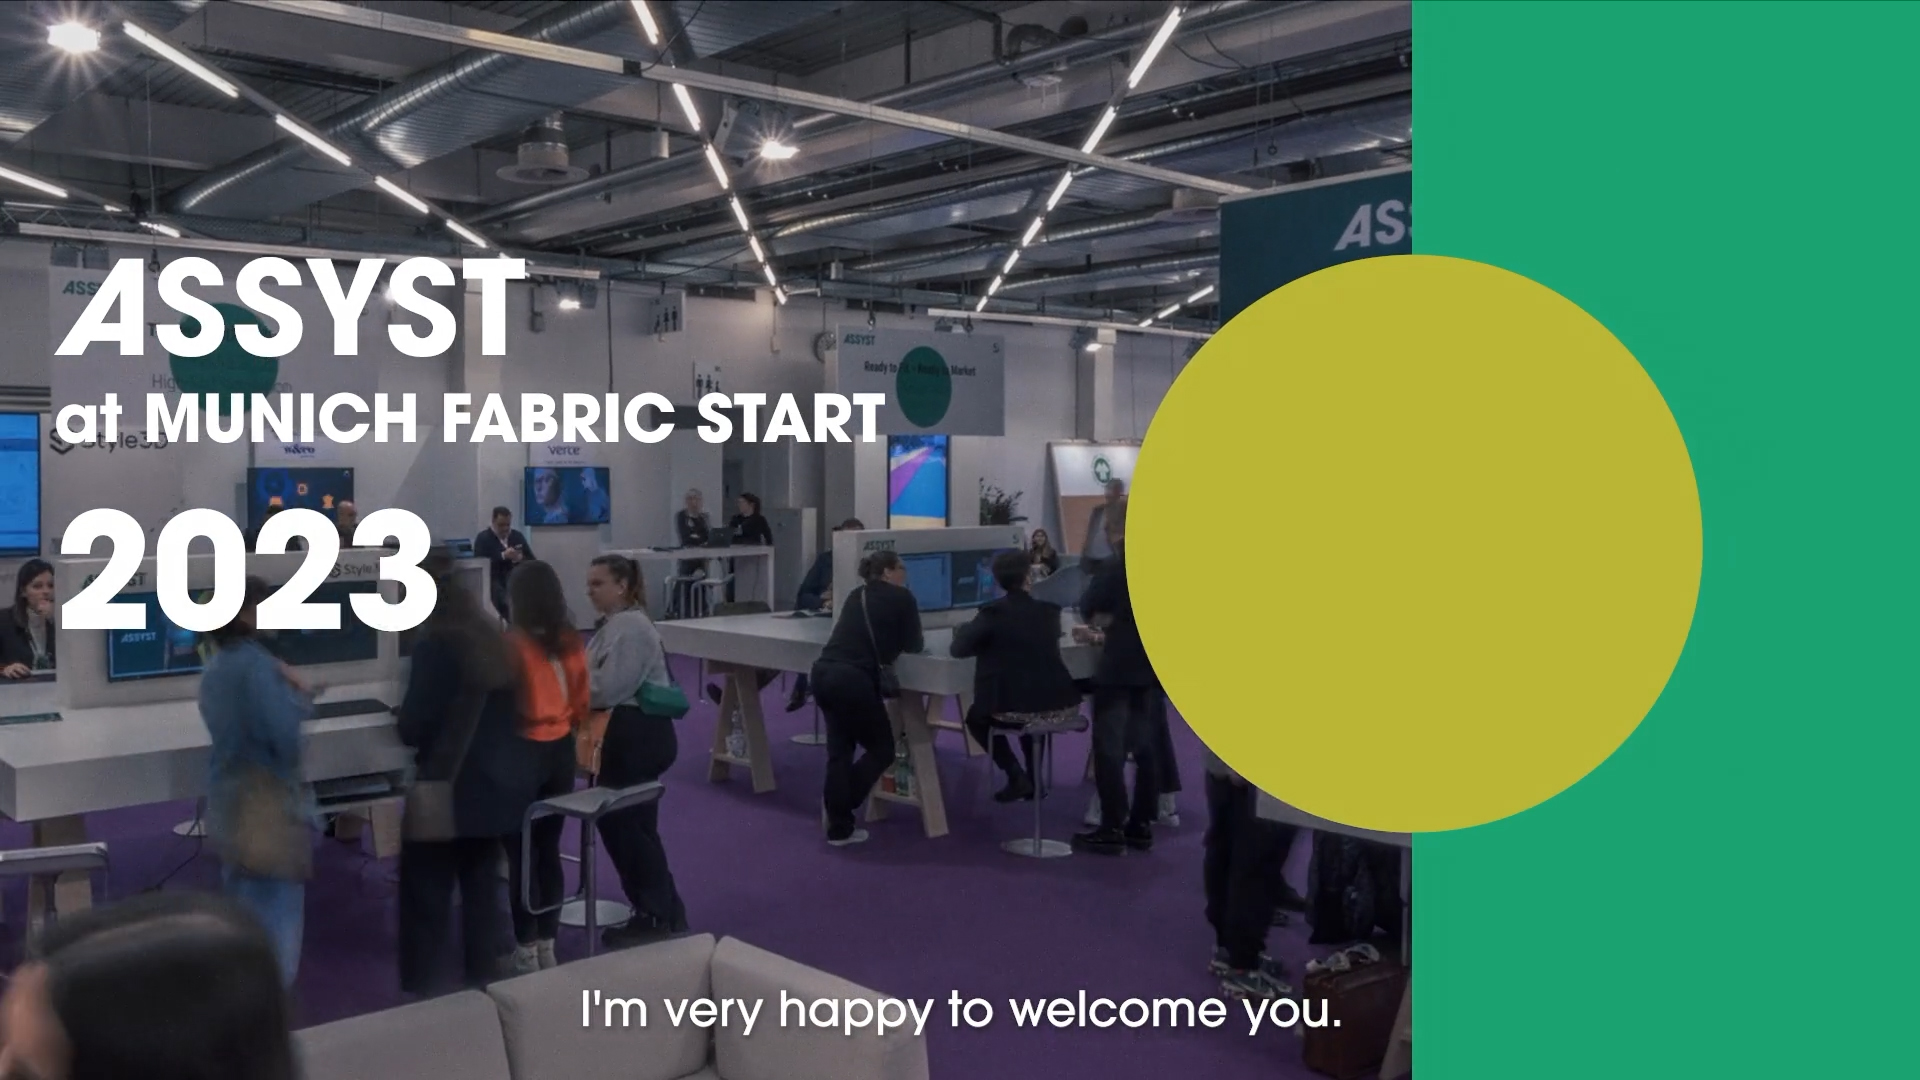 Fabric innovations with Sensil on show in Munich